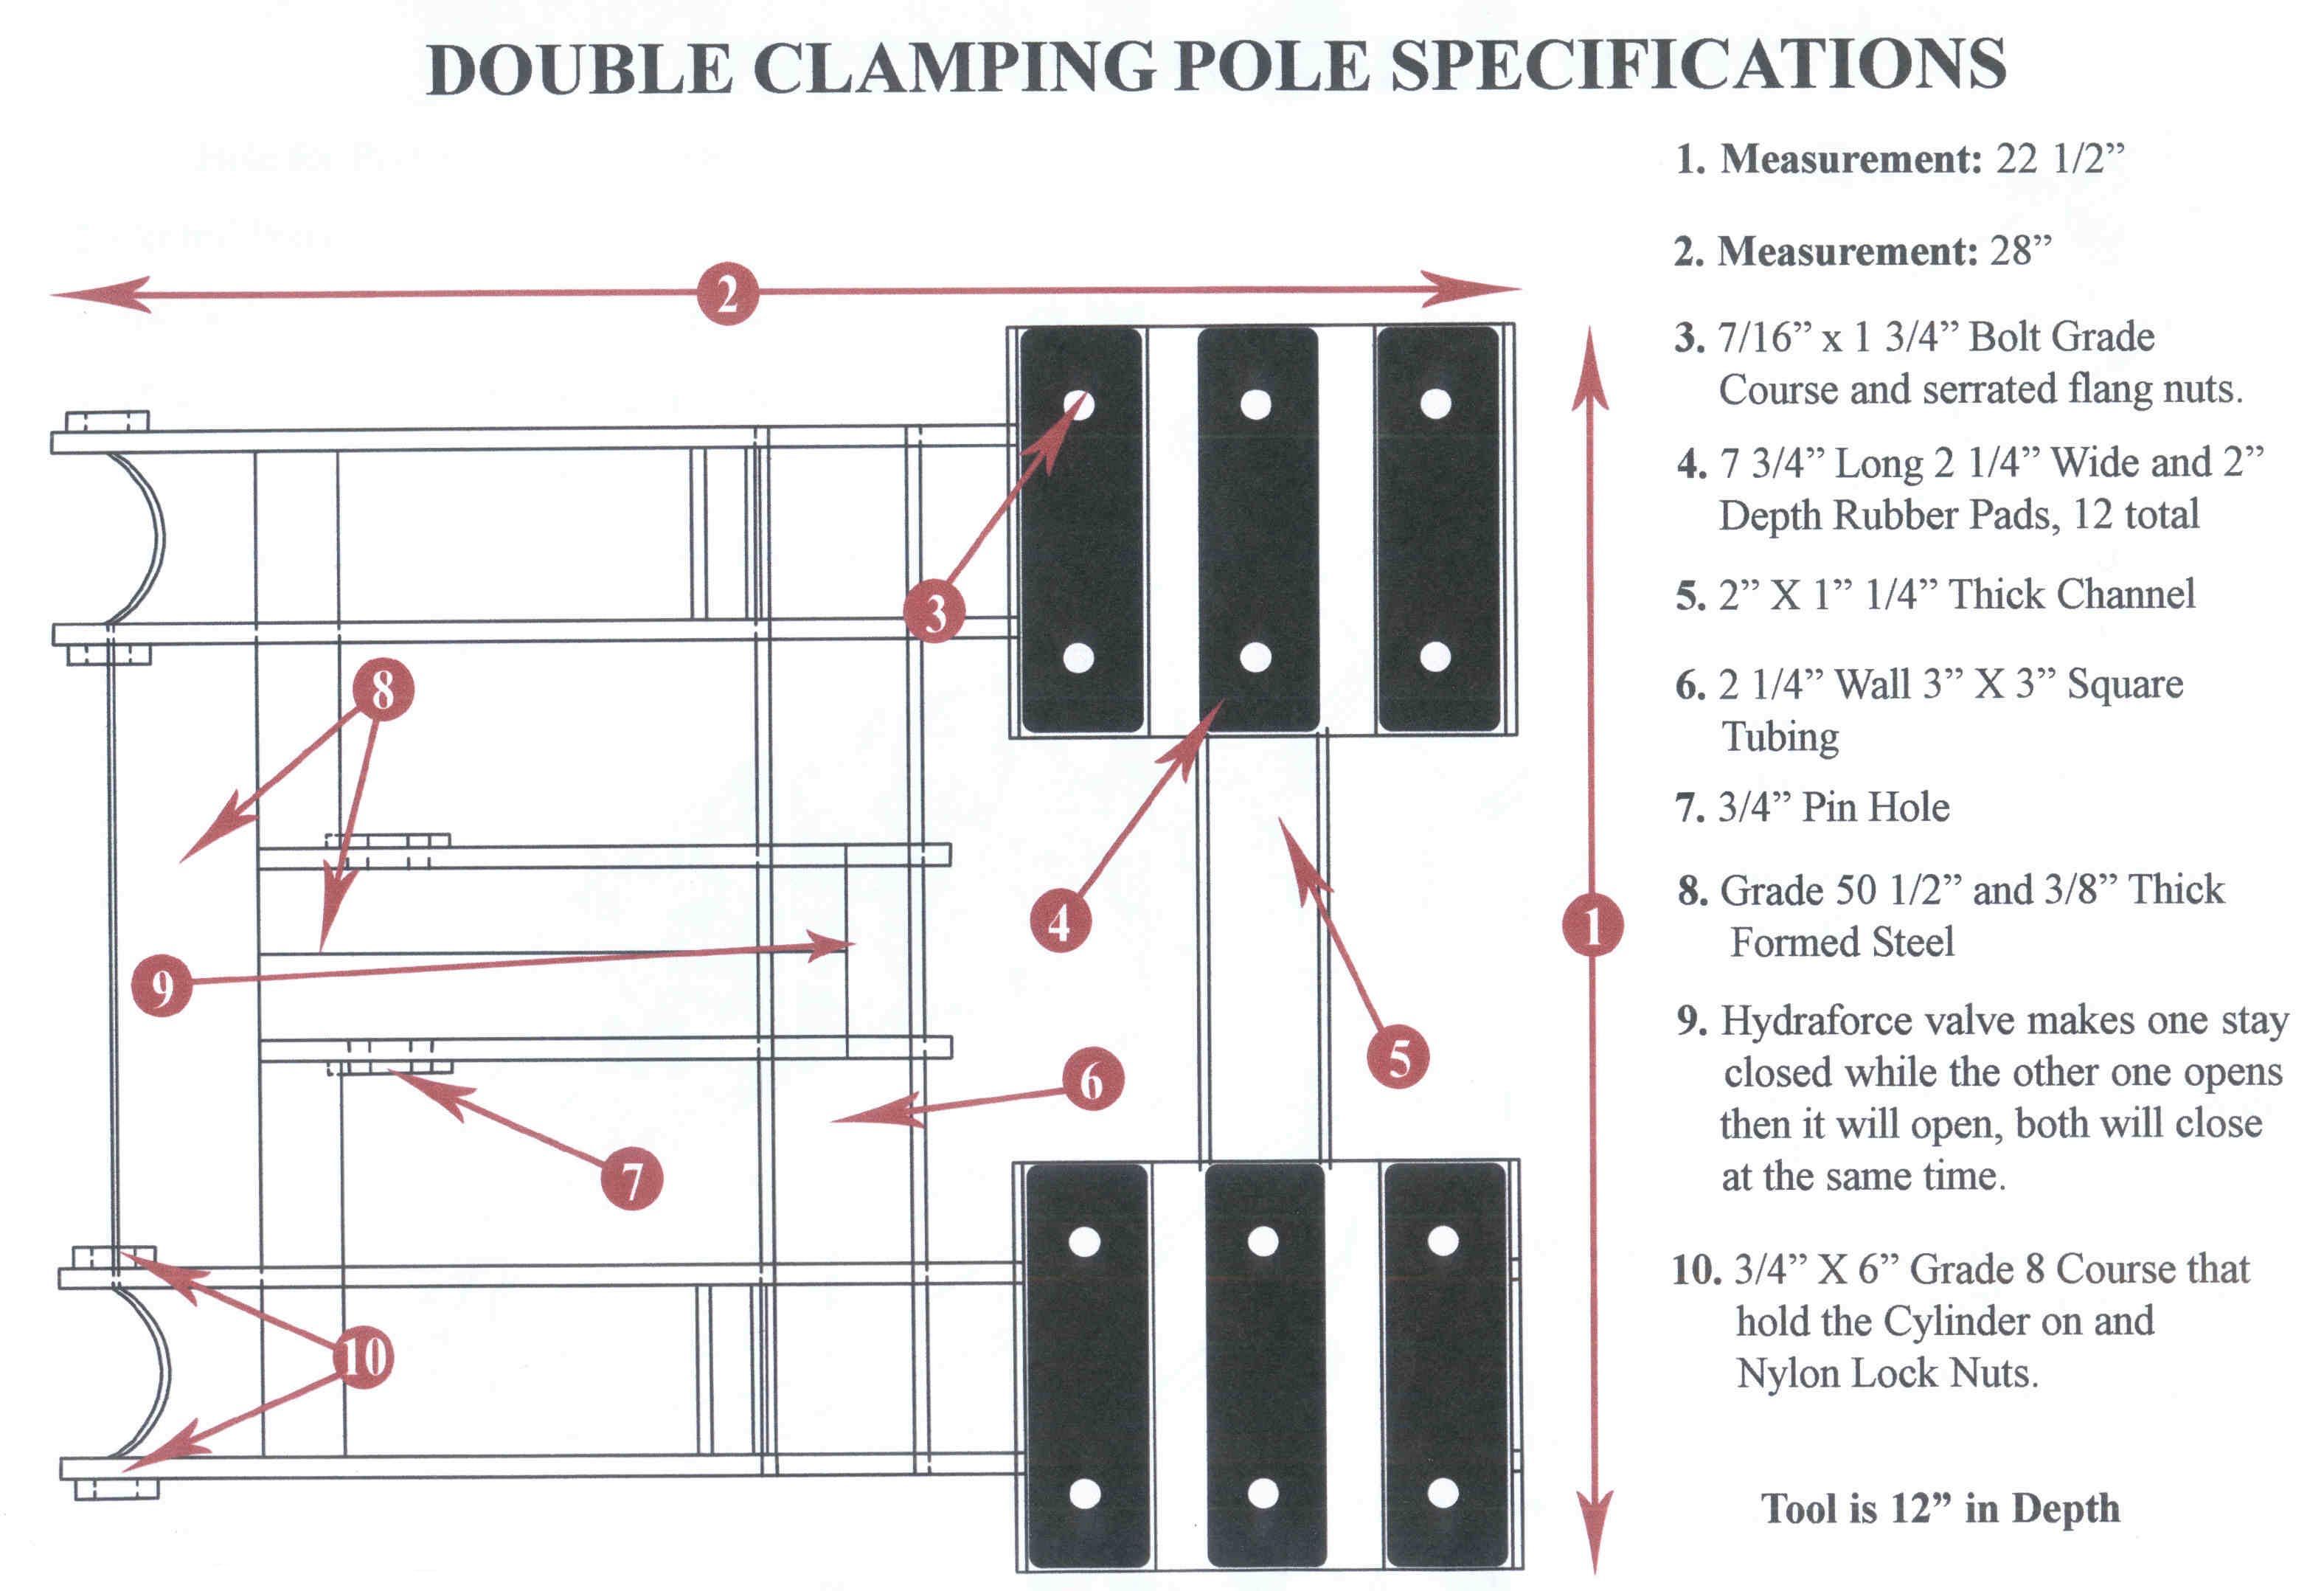 Specifications On Double Clamping Pole